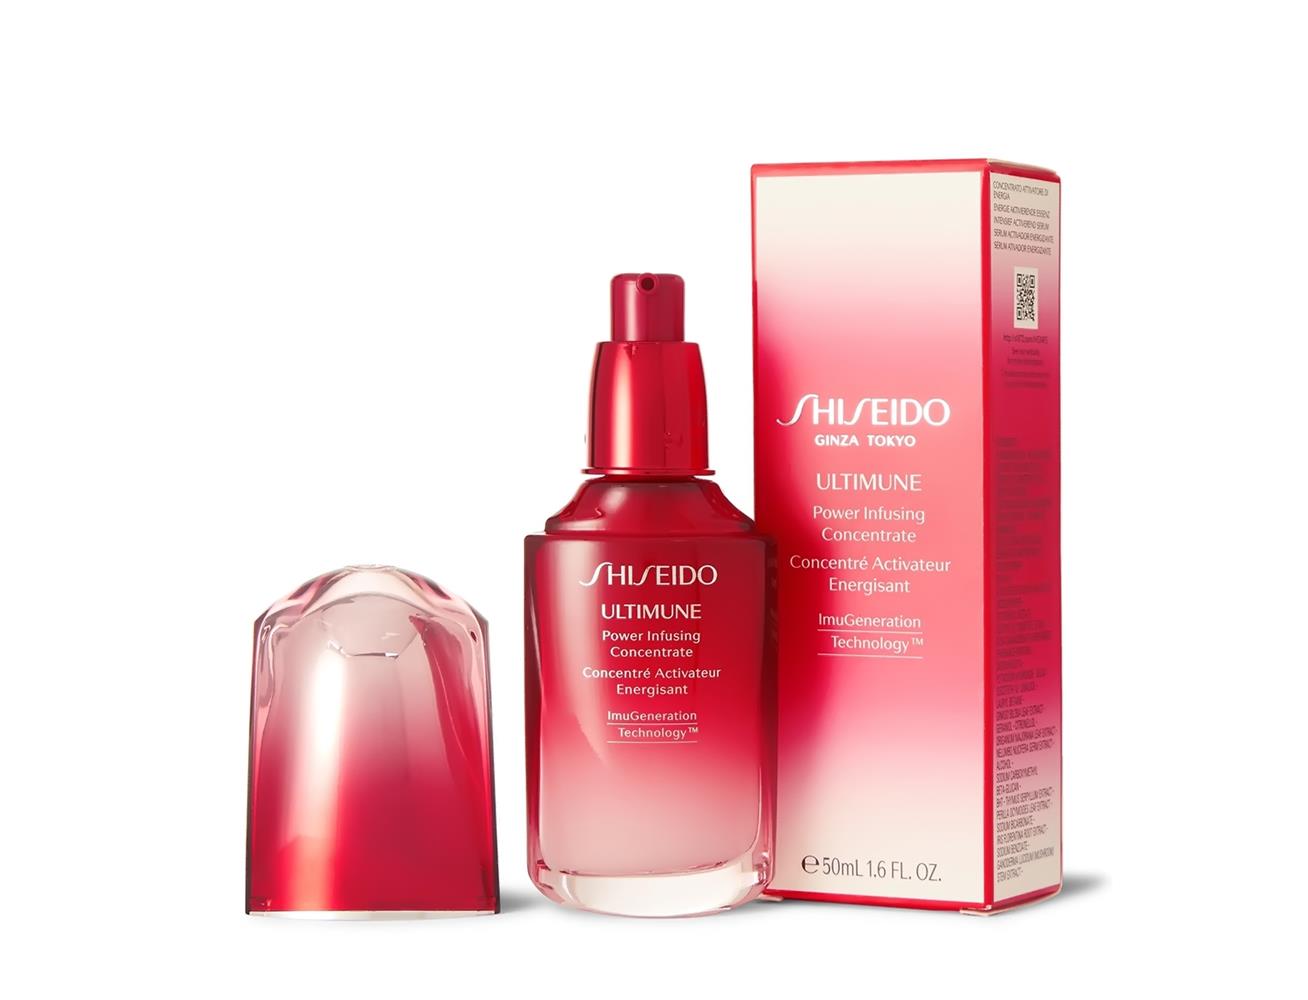 Ultimune концентрат шисейдо Power infusing. Концентрат Shiseido Ultimune Power infusing Concentrate. Сыворотка шисейдо. Шисейдо для волос. Shiseido ultimune power infusing concentrate